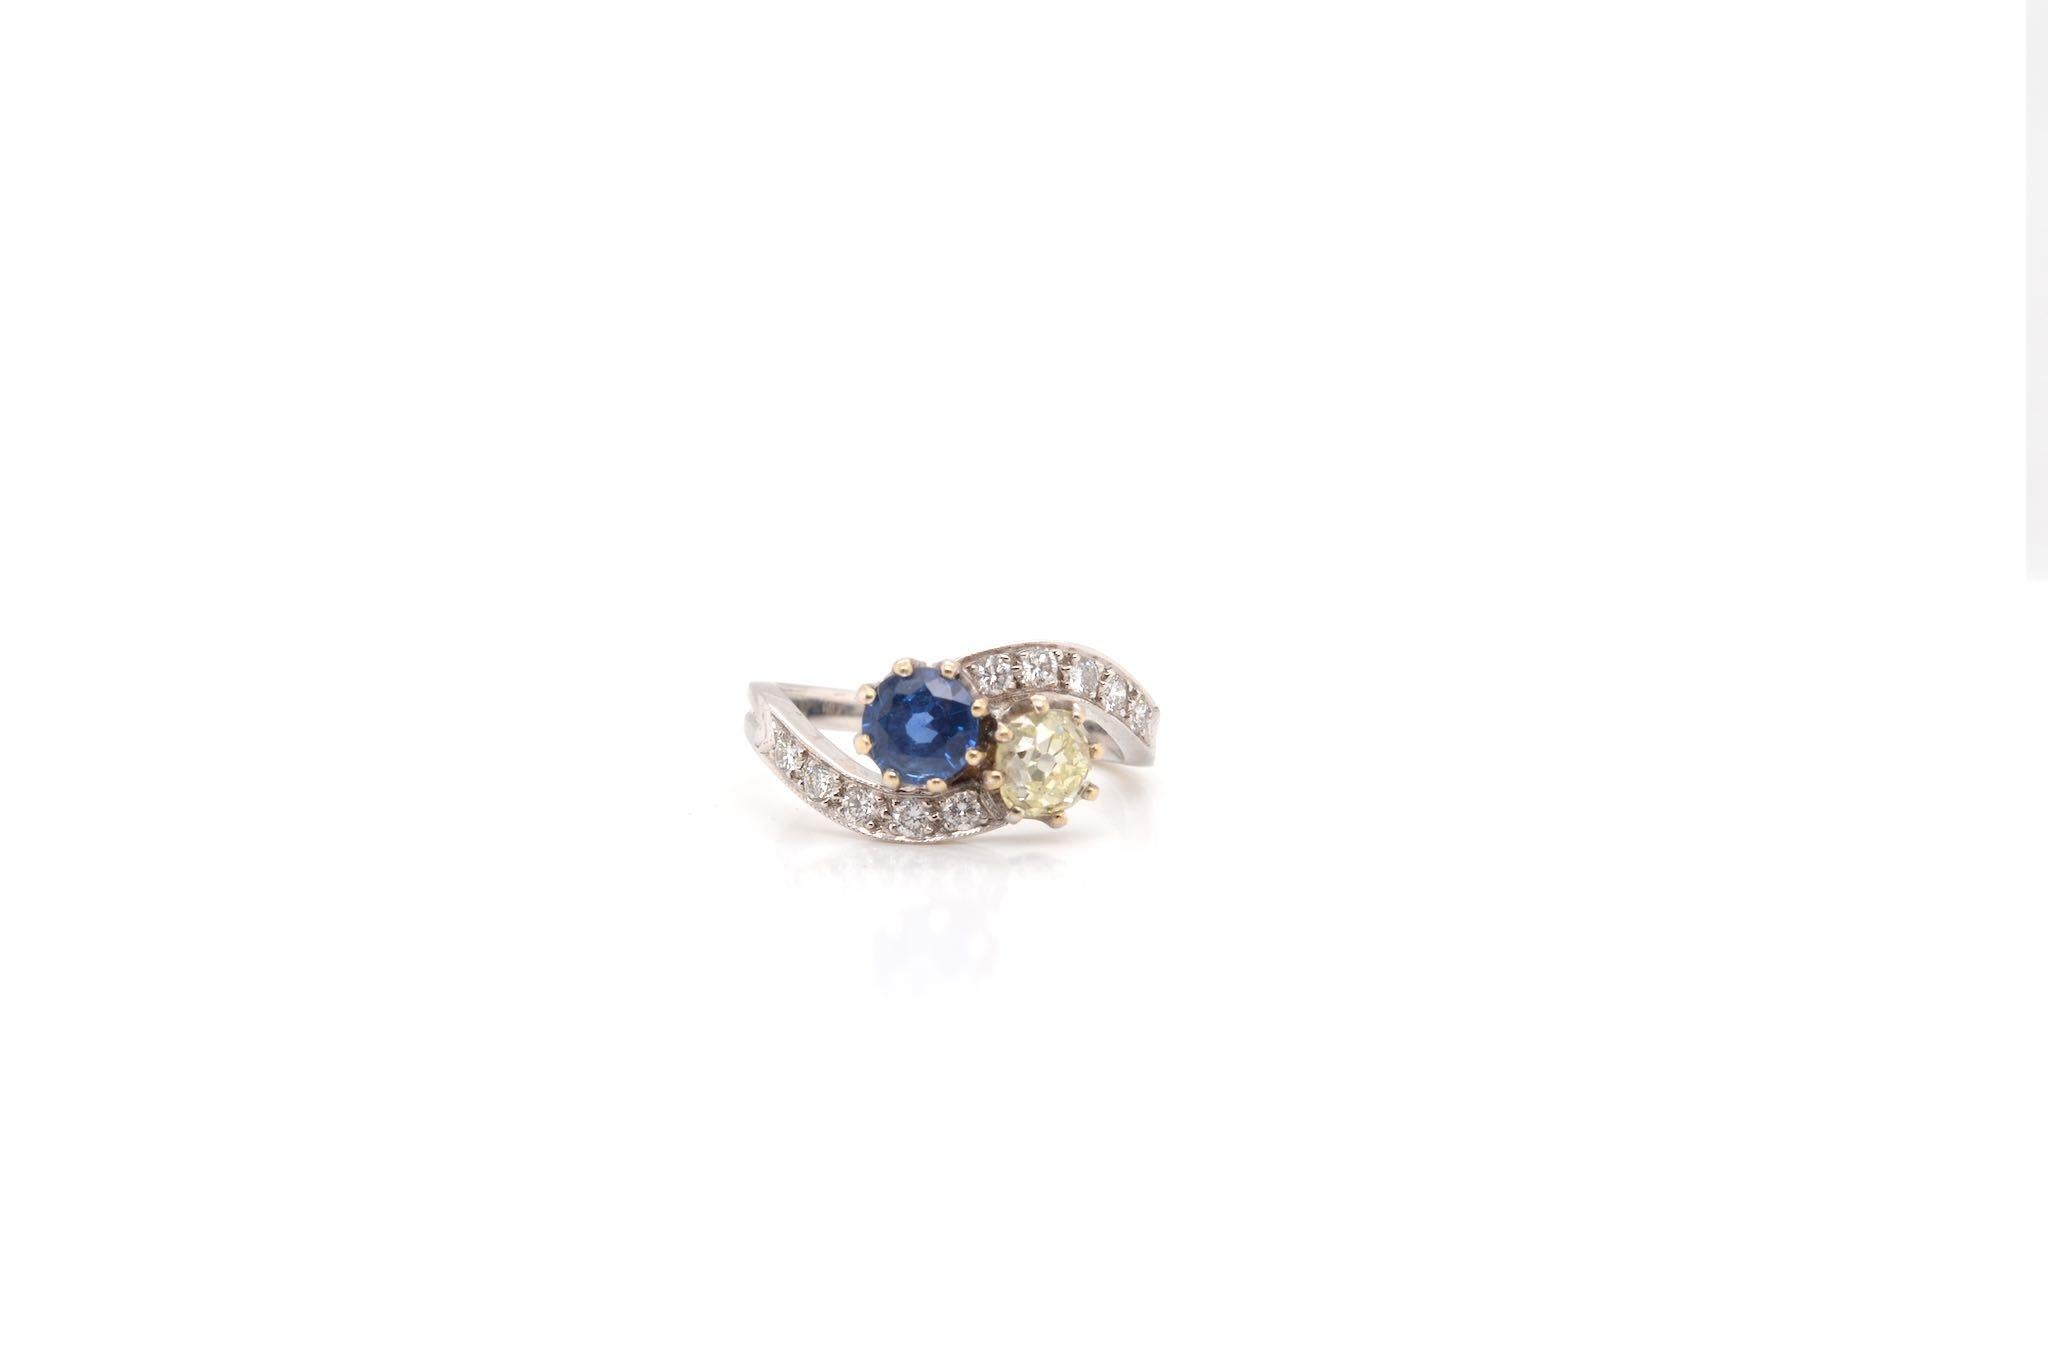 Stones: Round sapphire of 0.60 carat, old cut diamond of 0.40 carat
and diamond paving for a total weight of 0.30 carat.
Material: 18k white gold
Dimensions: 8 mm length on finger
Period: 1930
Weight: 4.1g
Size: 52 (free sizing)
Certificate
Ref. :